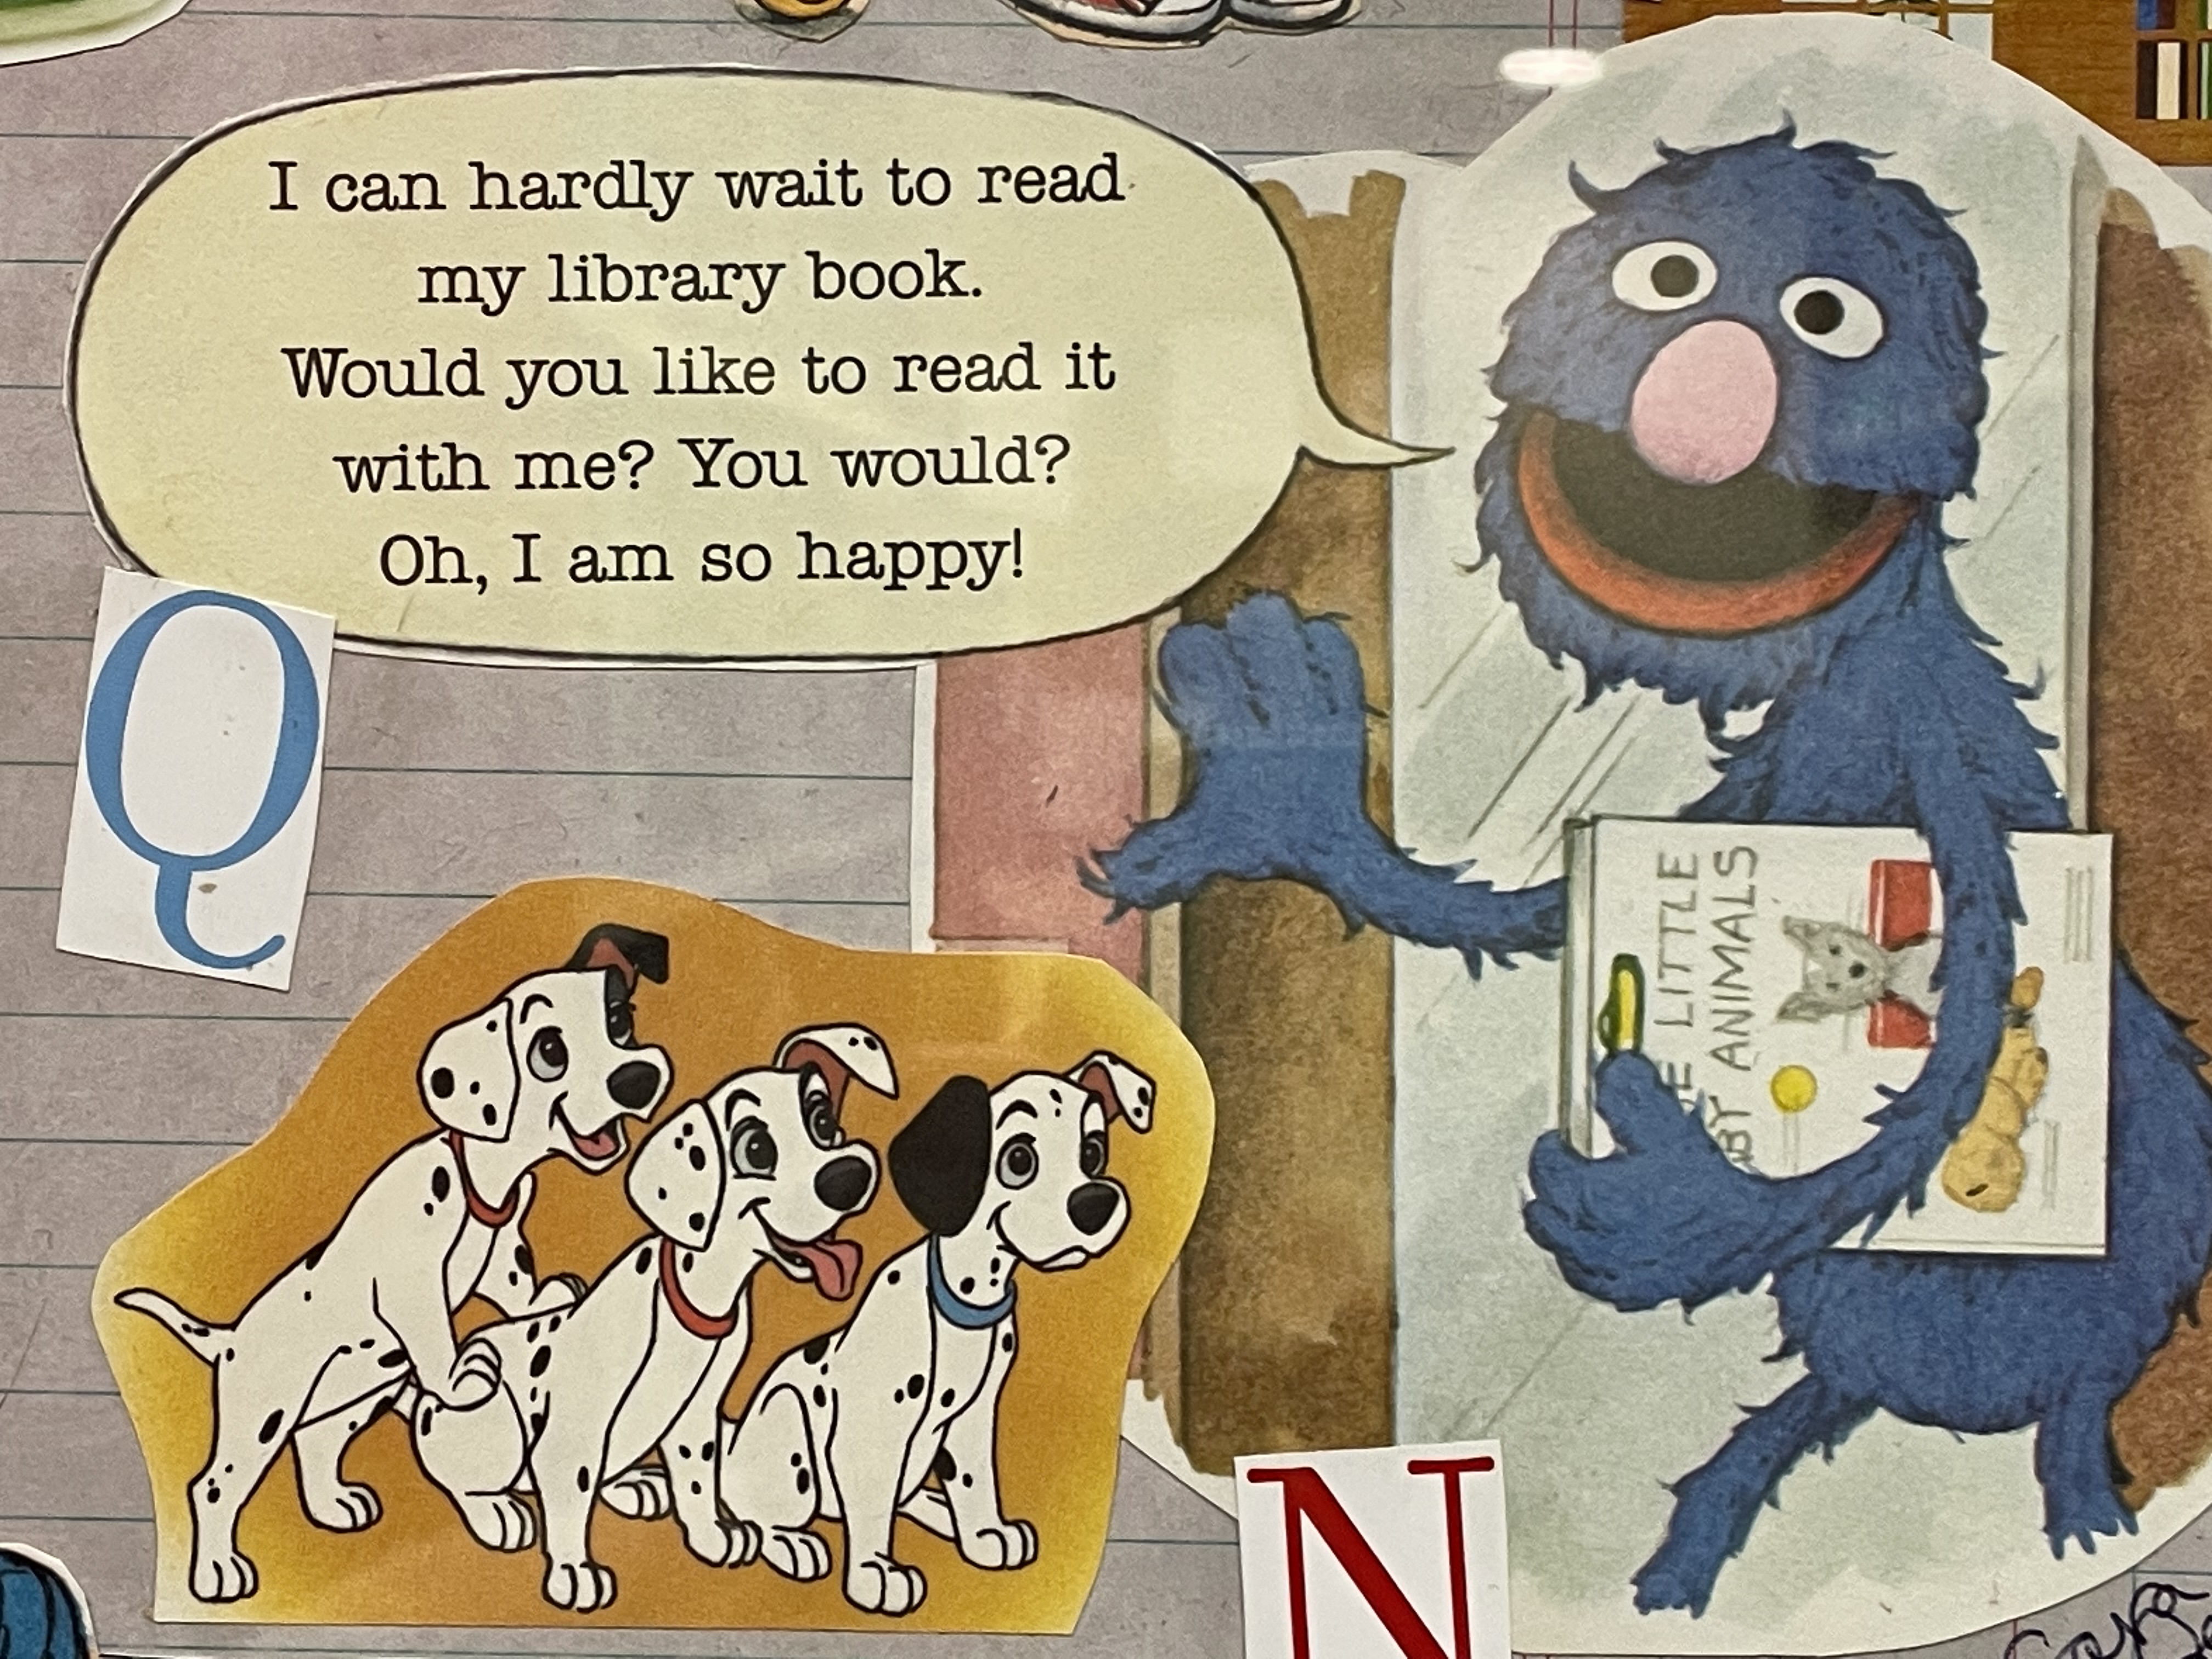 A collage featuring Grover from Sesame Street with a speech bubble saying "I can hardly wait to read my library book. Would you like to read it with me? You would? Oh, I am so happy!"